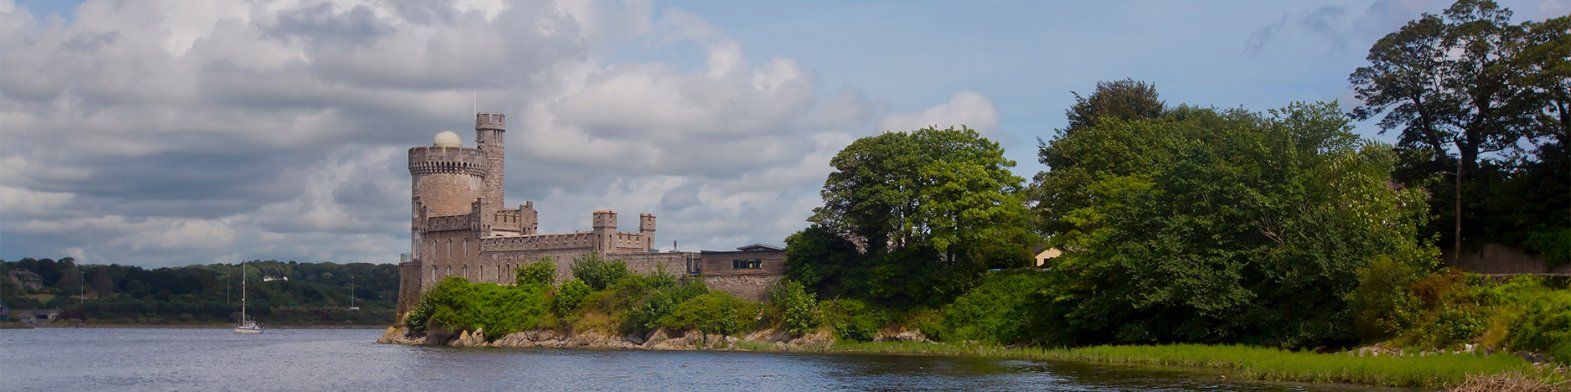 View of Blackrock Castle Observatory by the River Lee